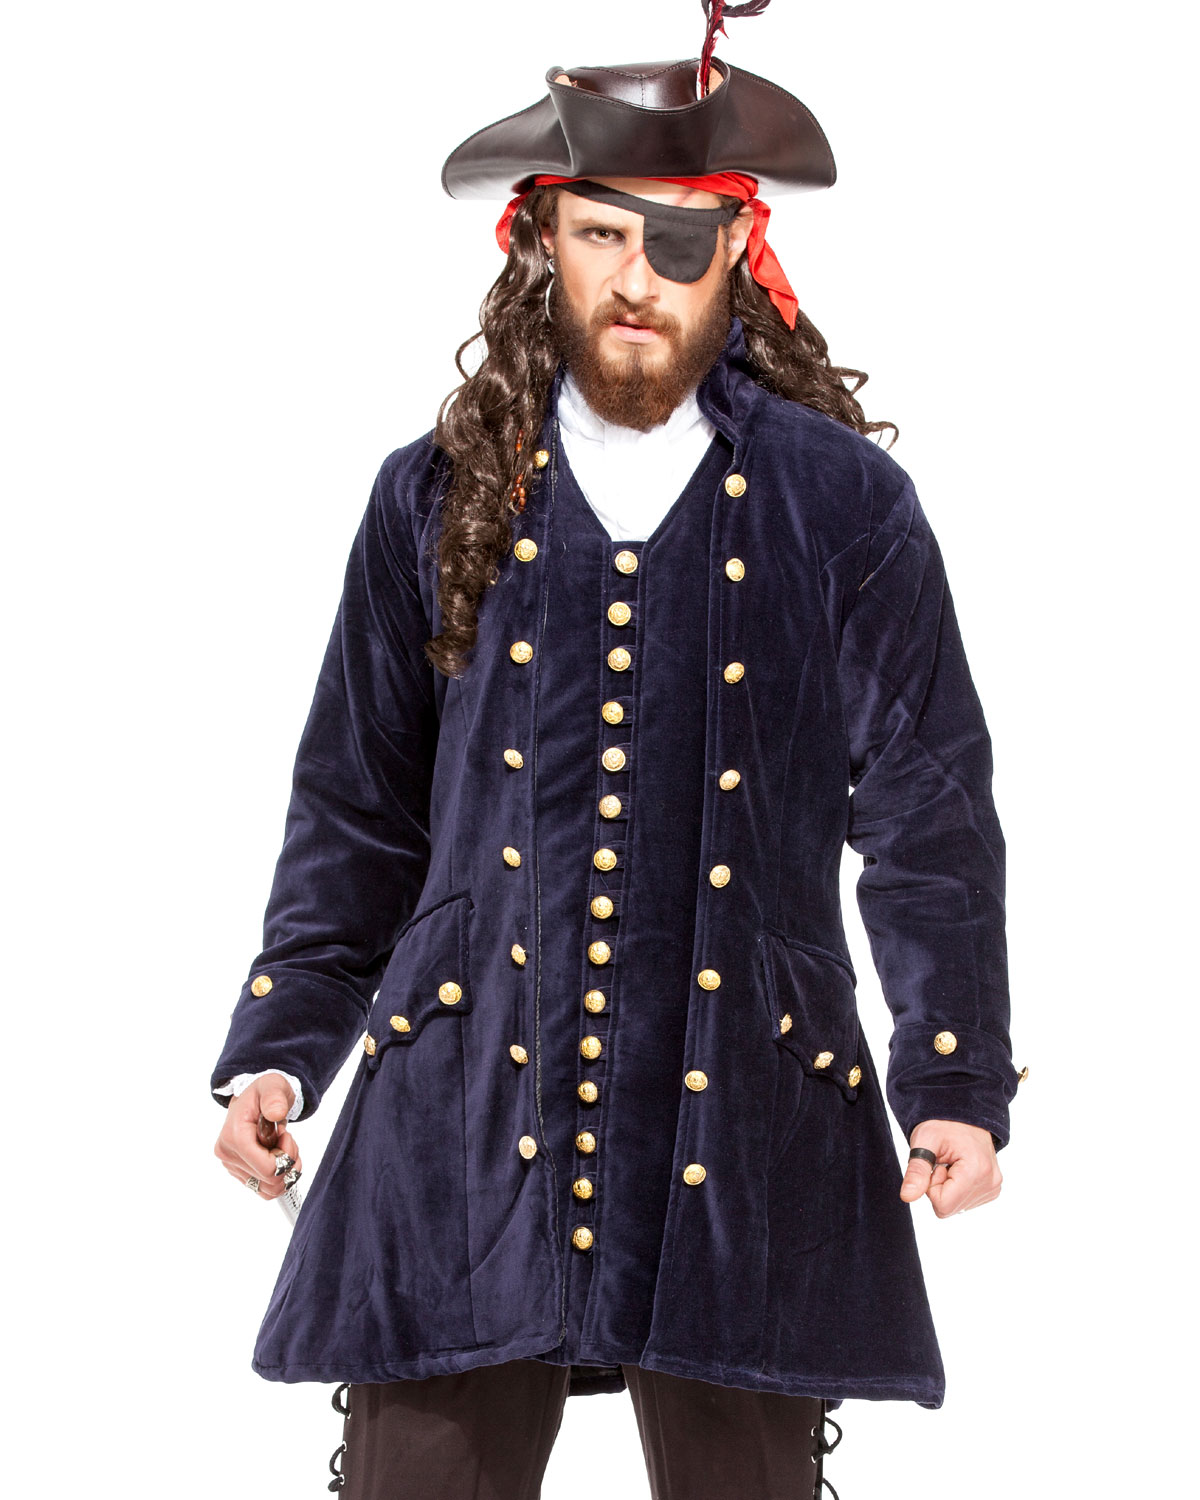 Captain Worley Coat - Click Image to Close